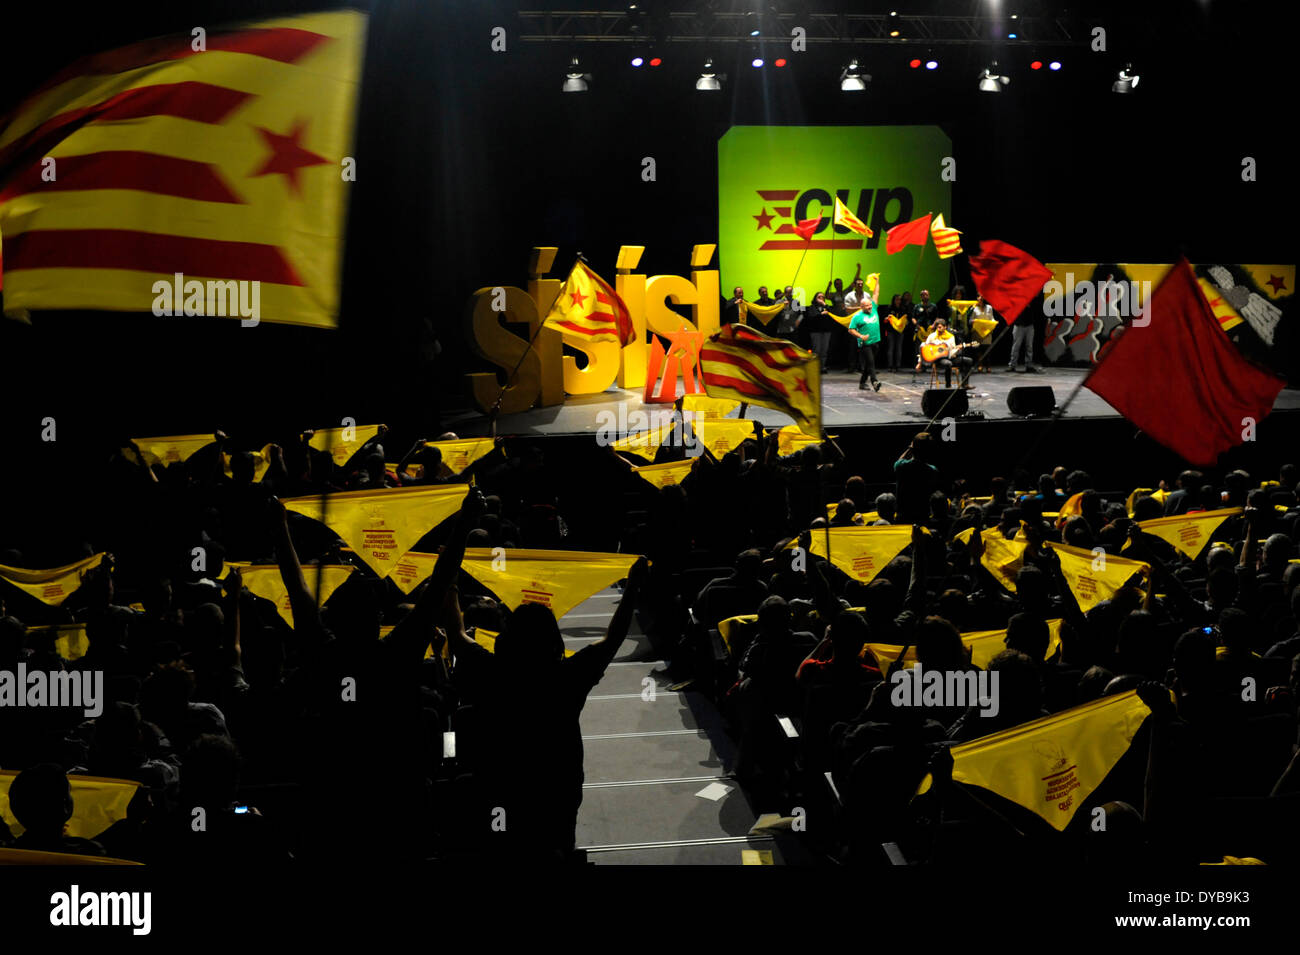 Barcelona, Catalonia, Spain-12th April, 2014.Mass during the meeting of Popular Unity Candidatures (CUP) with Catalan independence flags. Popular Unity Candidatures (CUP), a left-wing Catalan Countries pro-independence party, celebrated a meeting for say yes to catalan independence via a referendum. Stock Photo